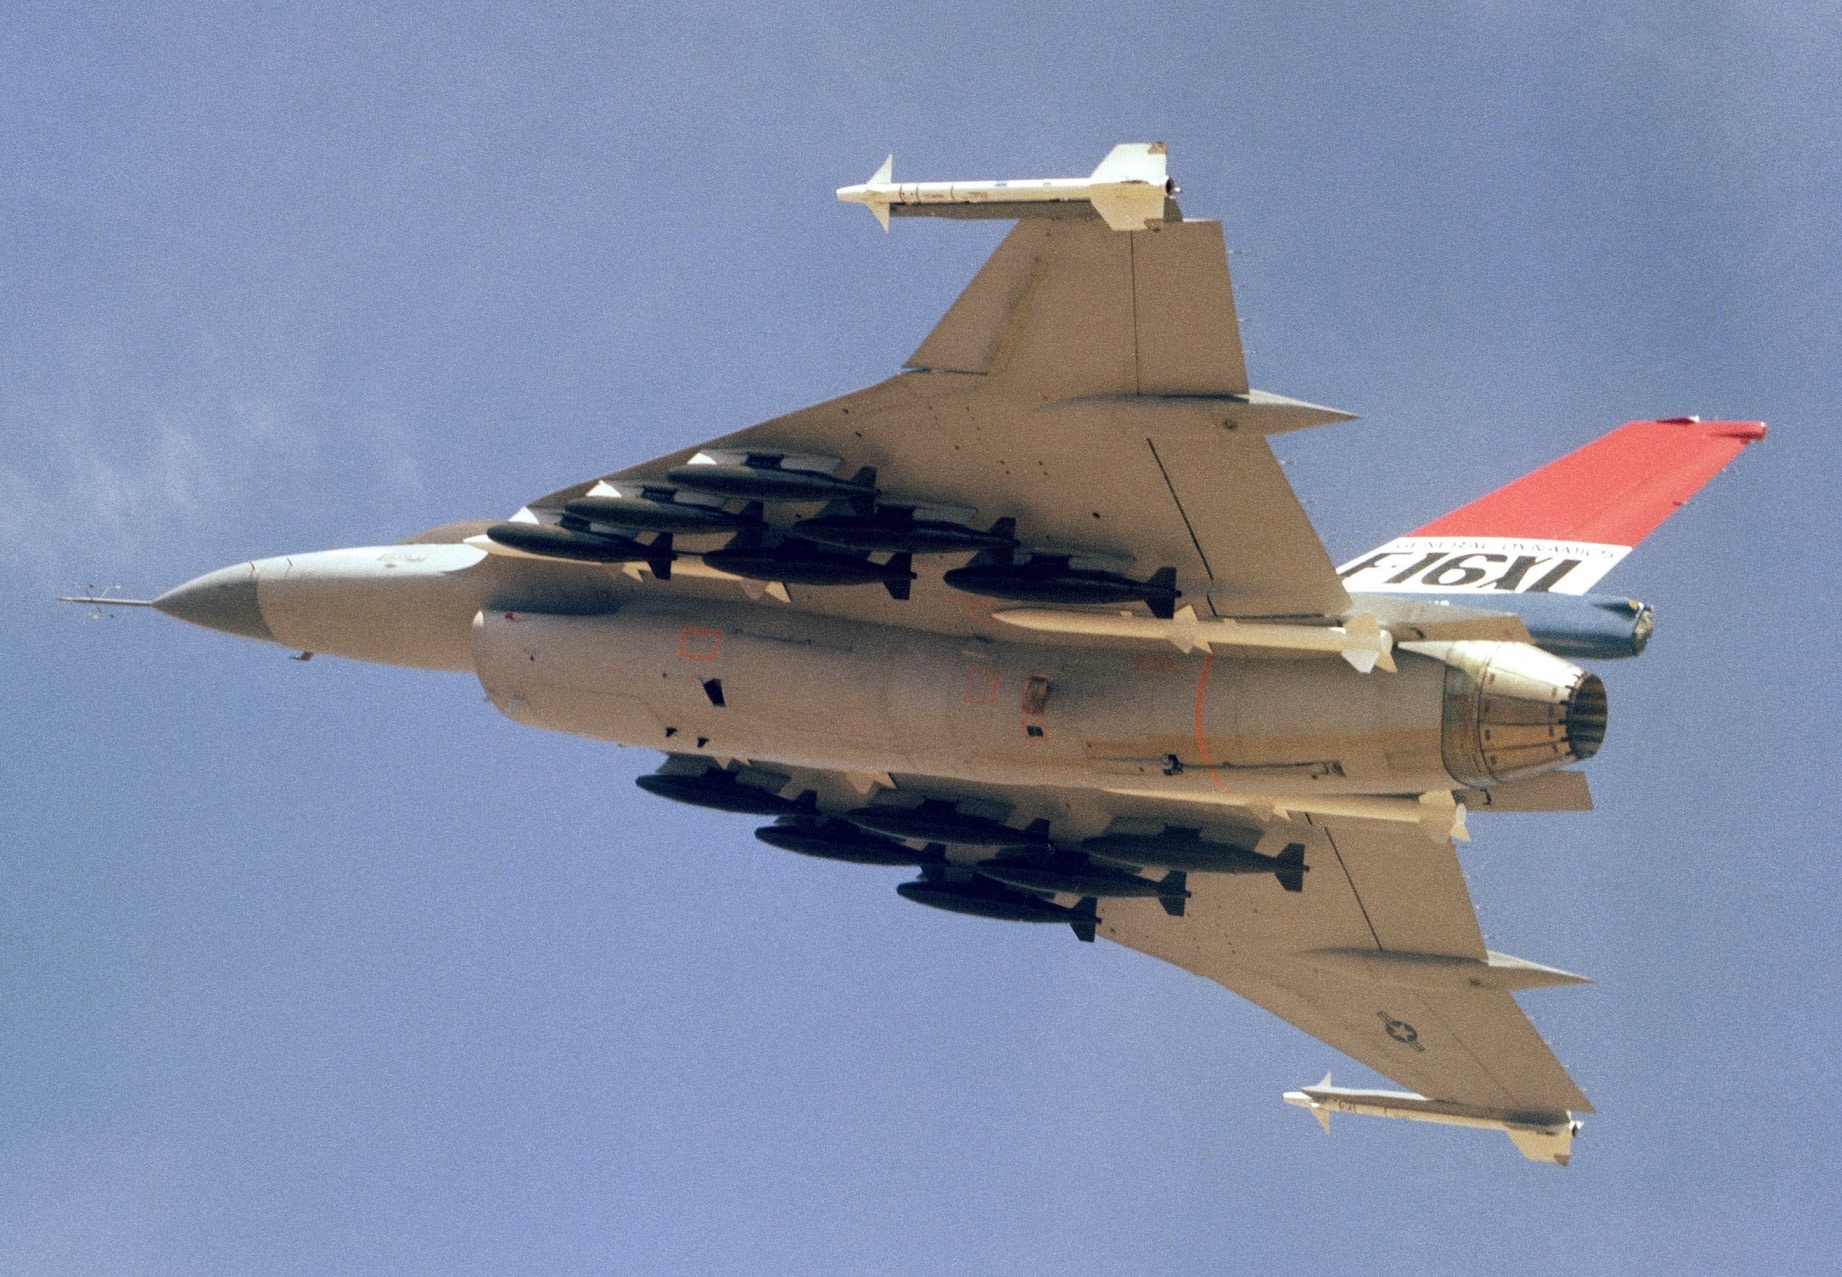 F-16XL pictured from below.